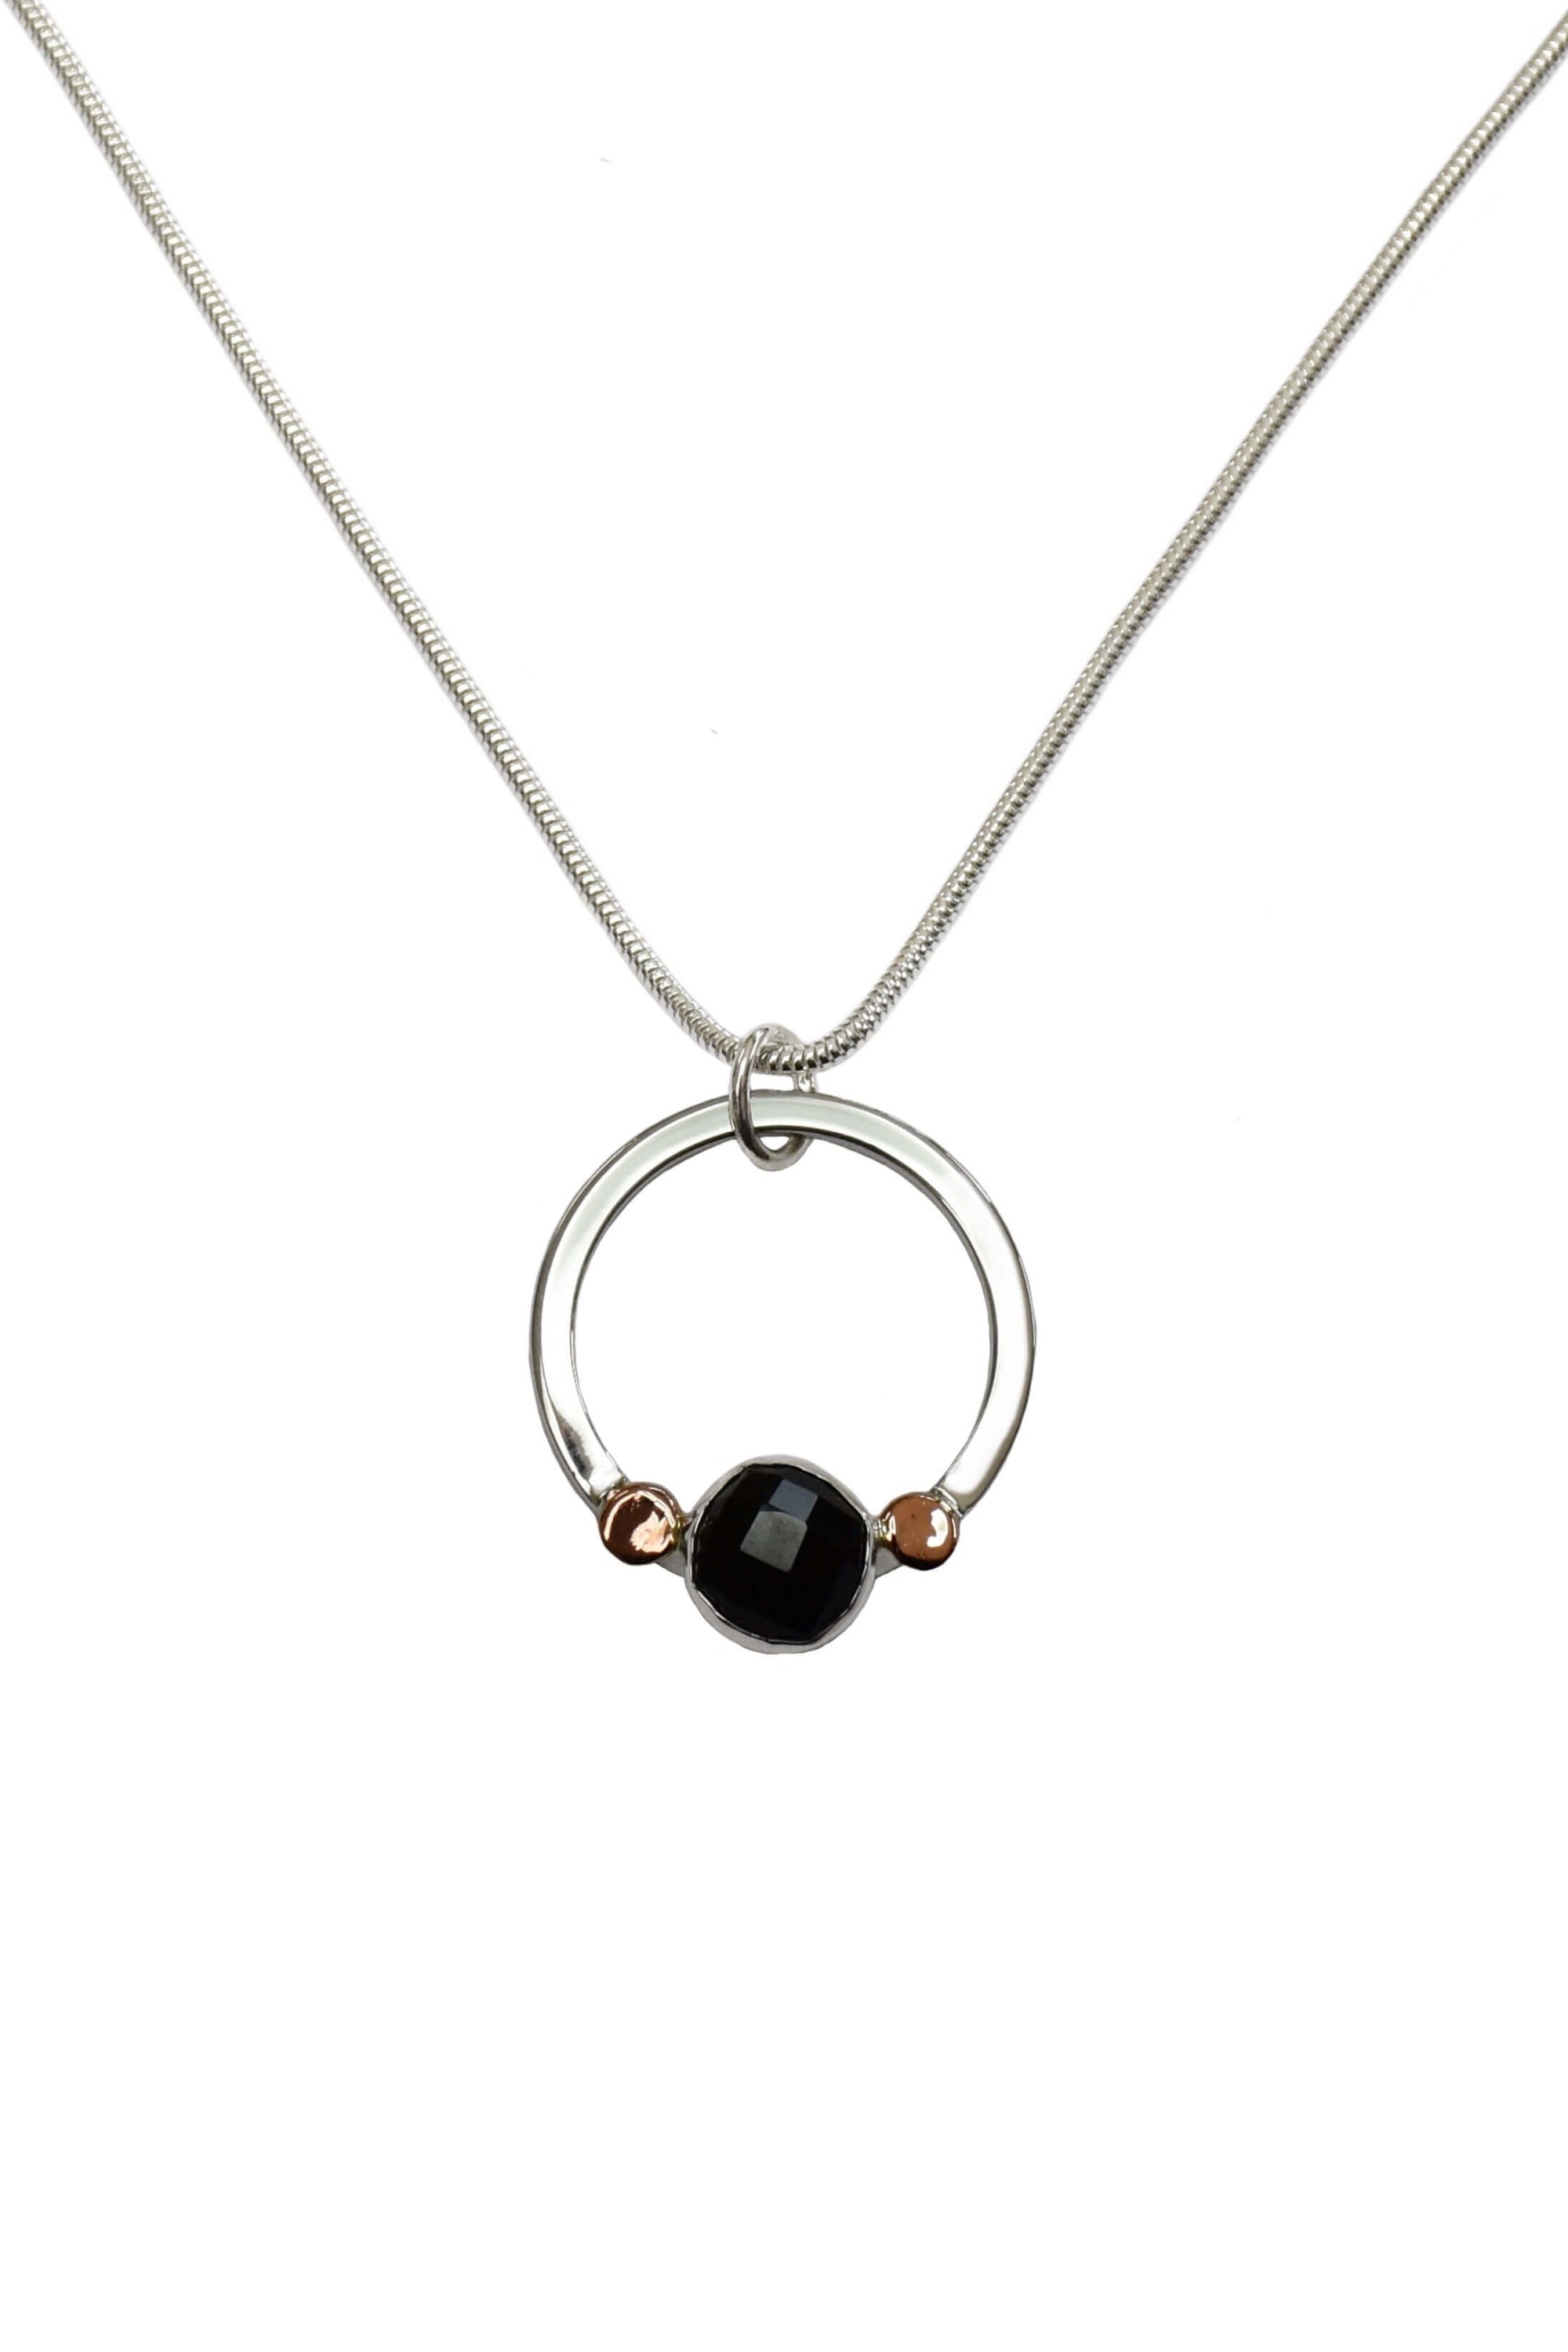 A handmade sterling silver black onyx pendant with rose gold pebbles.